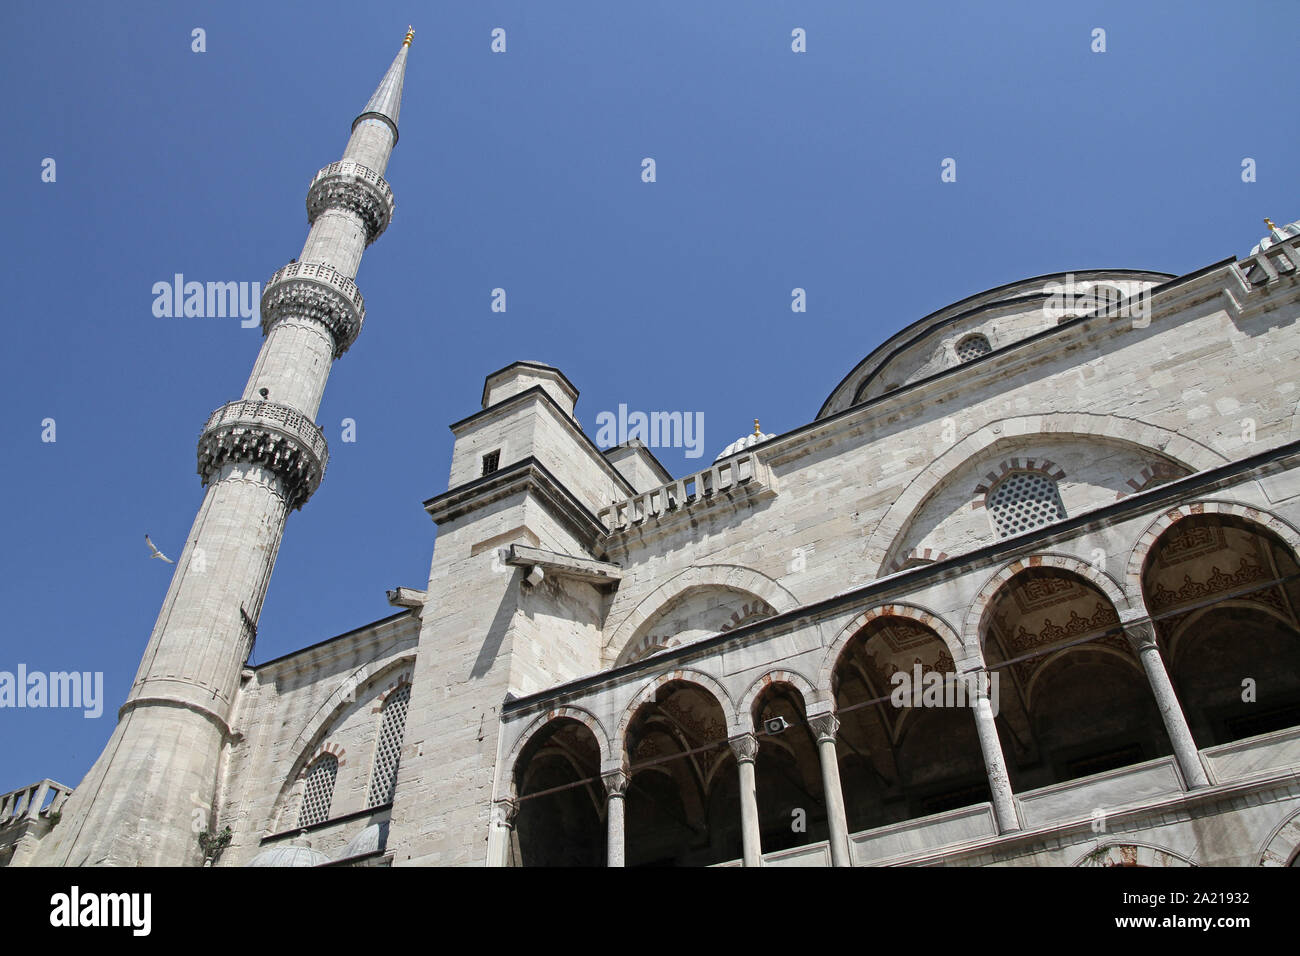 Blue Mosque seen from the outer courtyard, against blue sky, Fatih, Istanbul, Turkey. Stock Photo